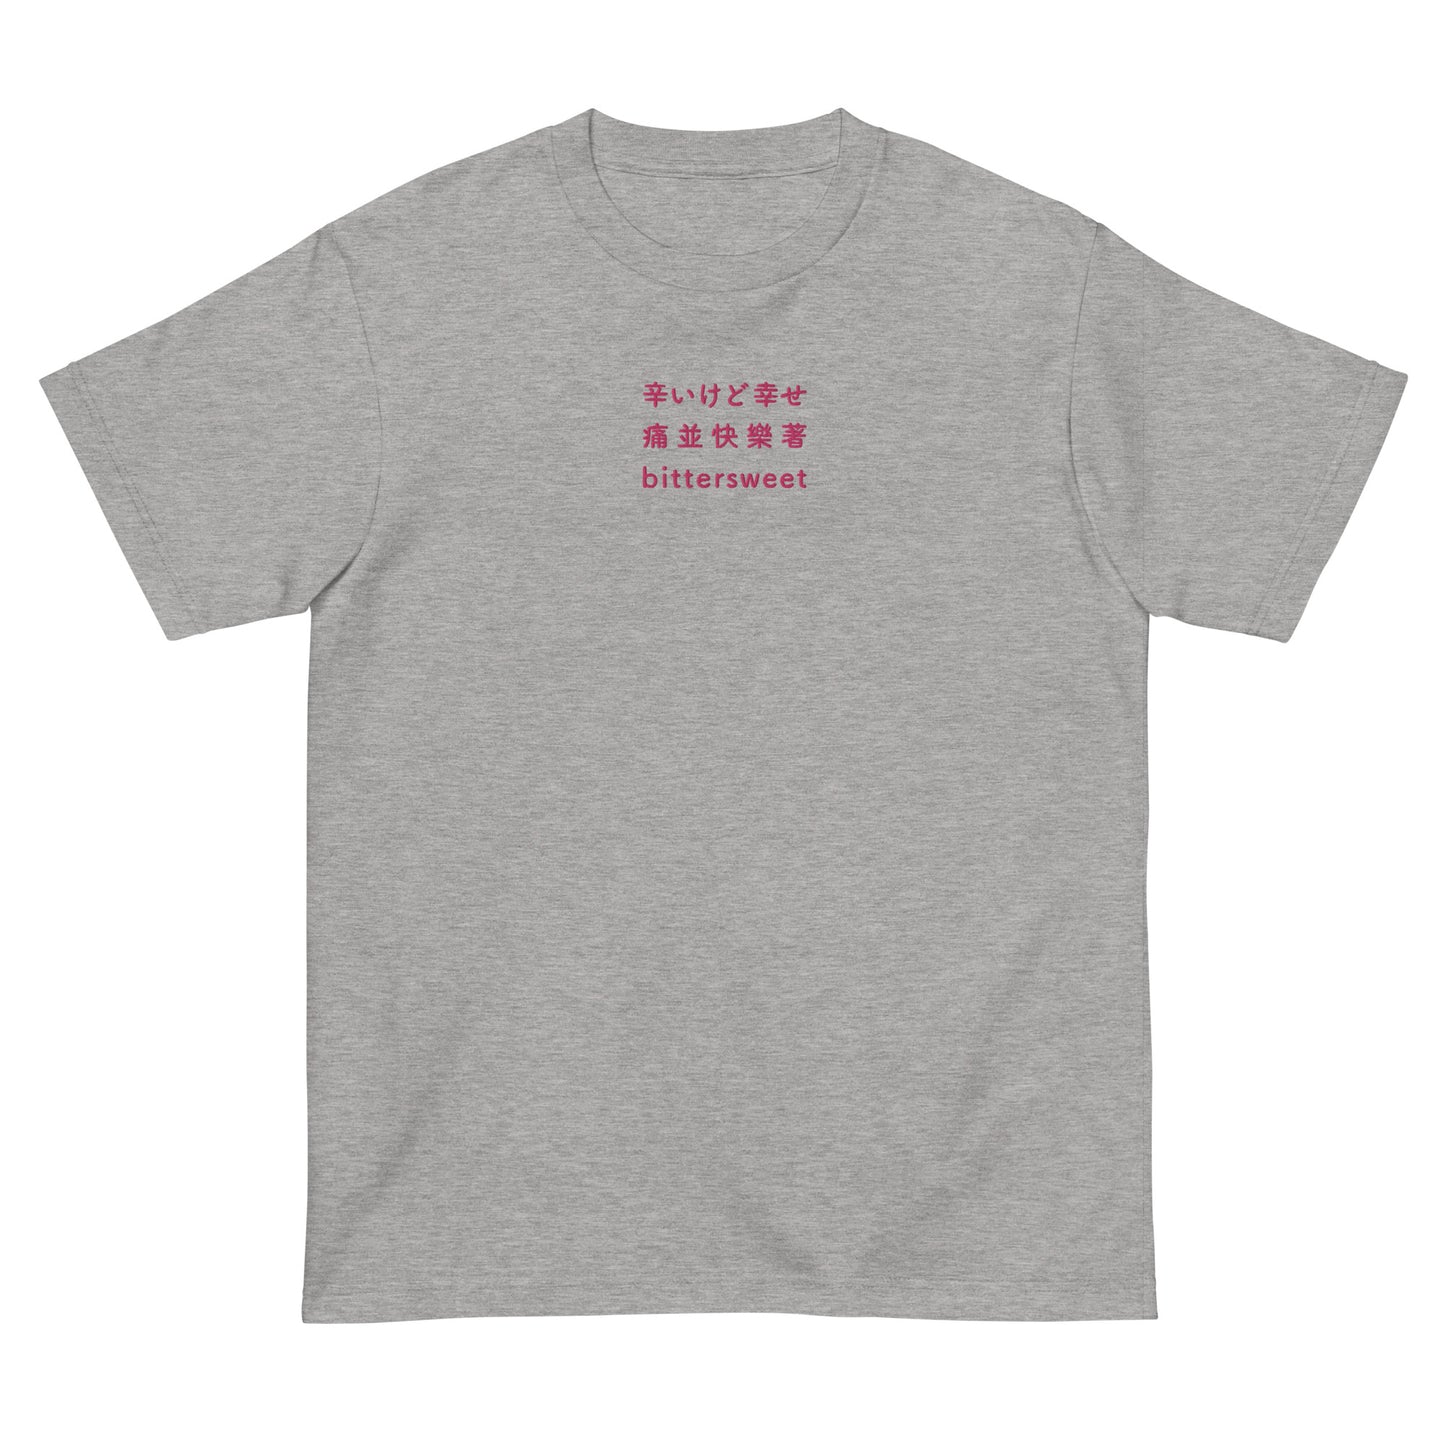 Gray High Quality Tee - Front Design with an Pink Embroidery "Bittersweet" in Japanese,Chinese and English